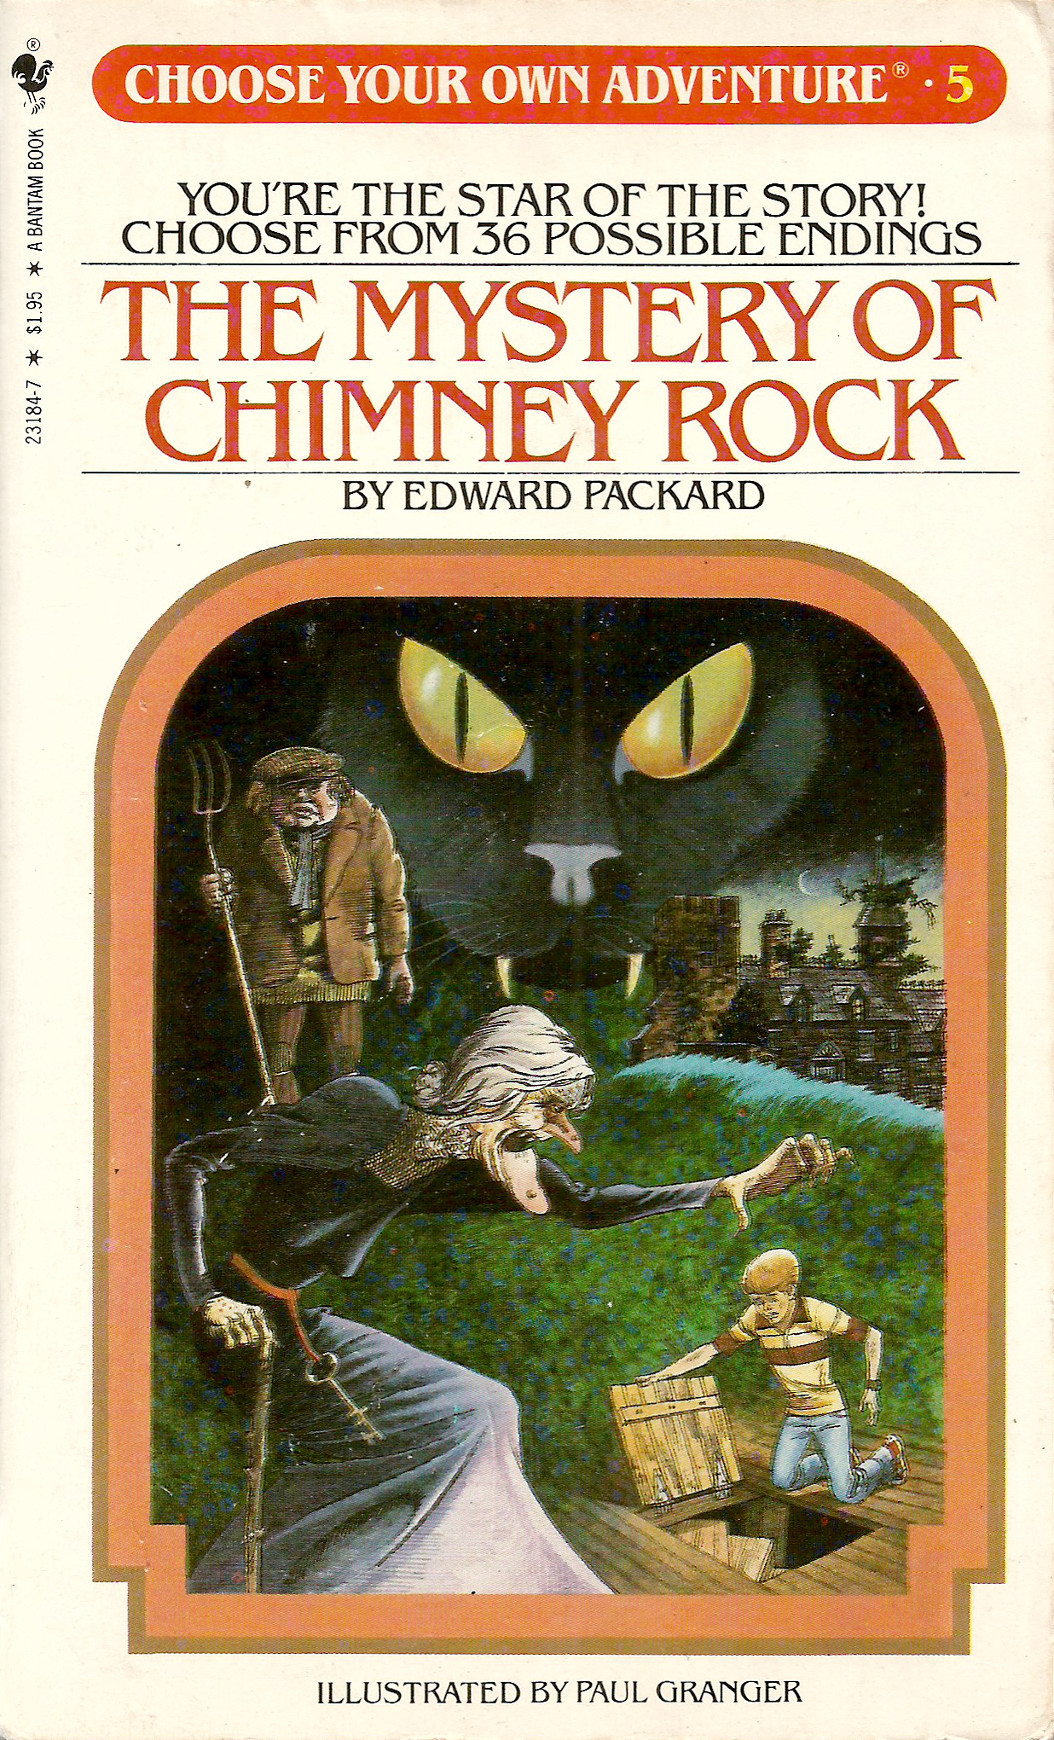 Choose Your Own Adventure No. 5: The Mystery of Chimney Rock, by Edward Packard.